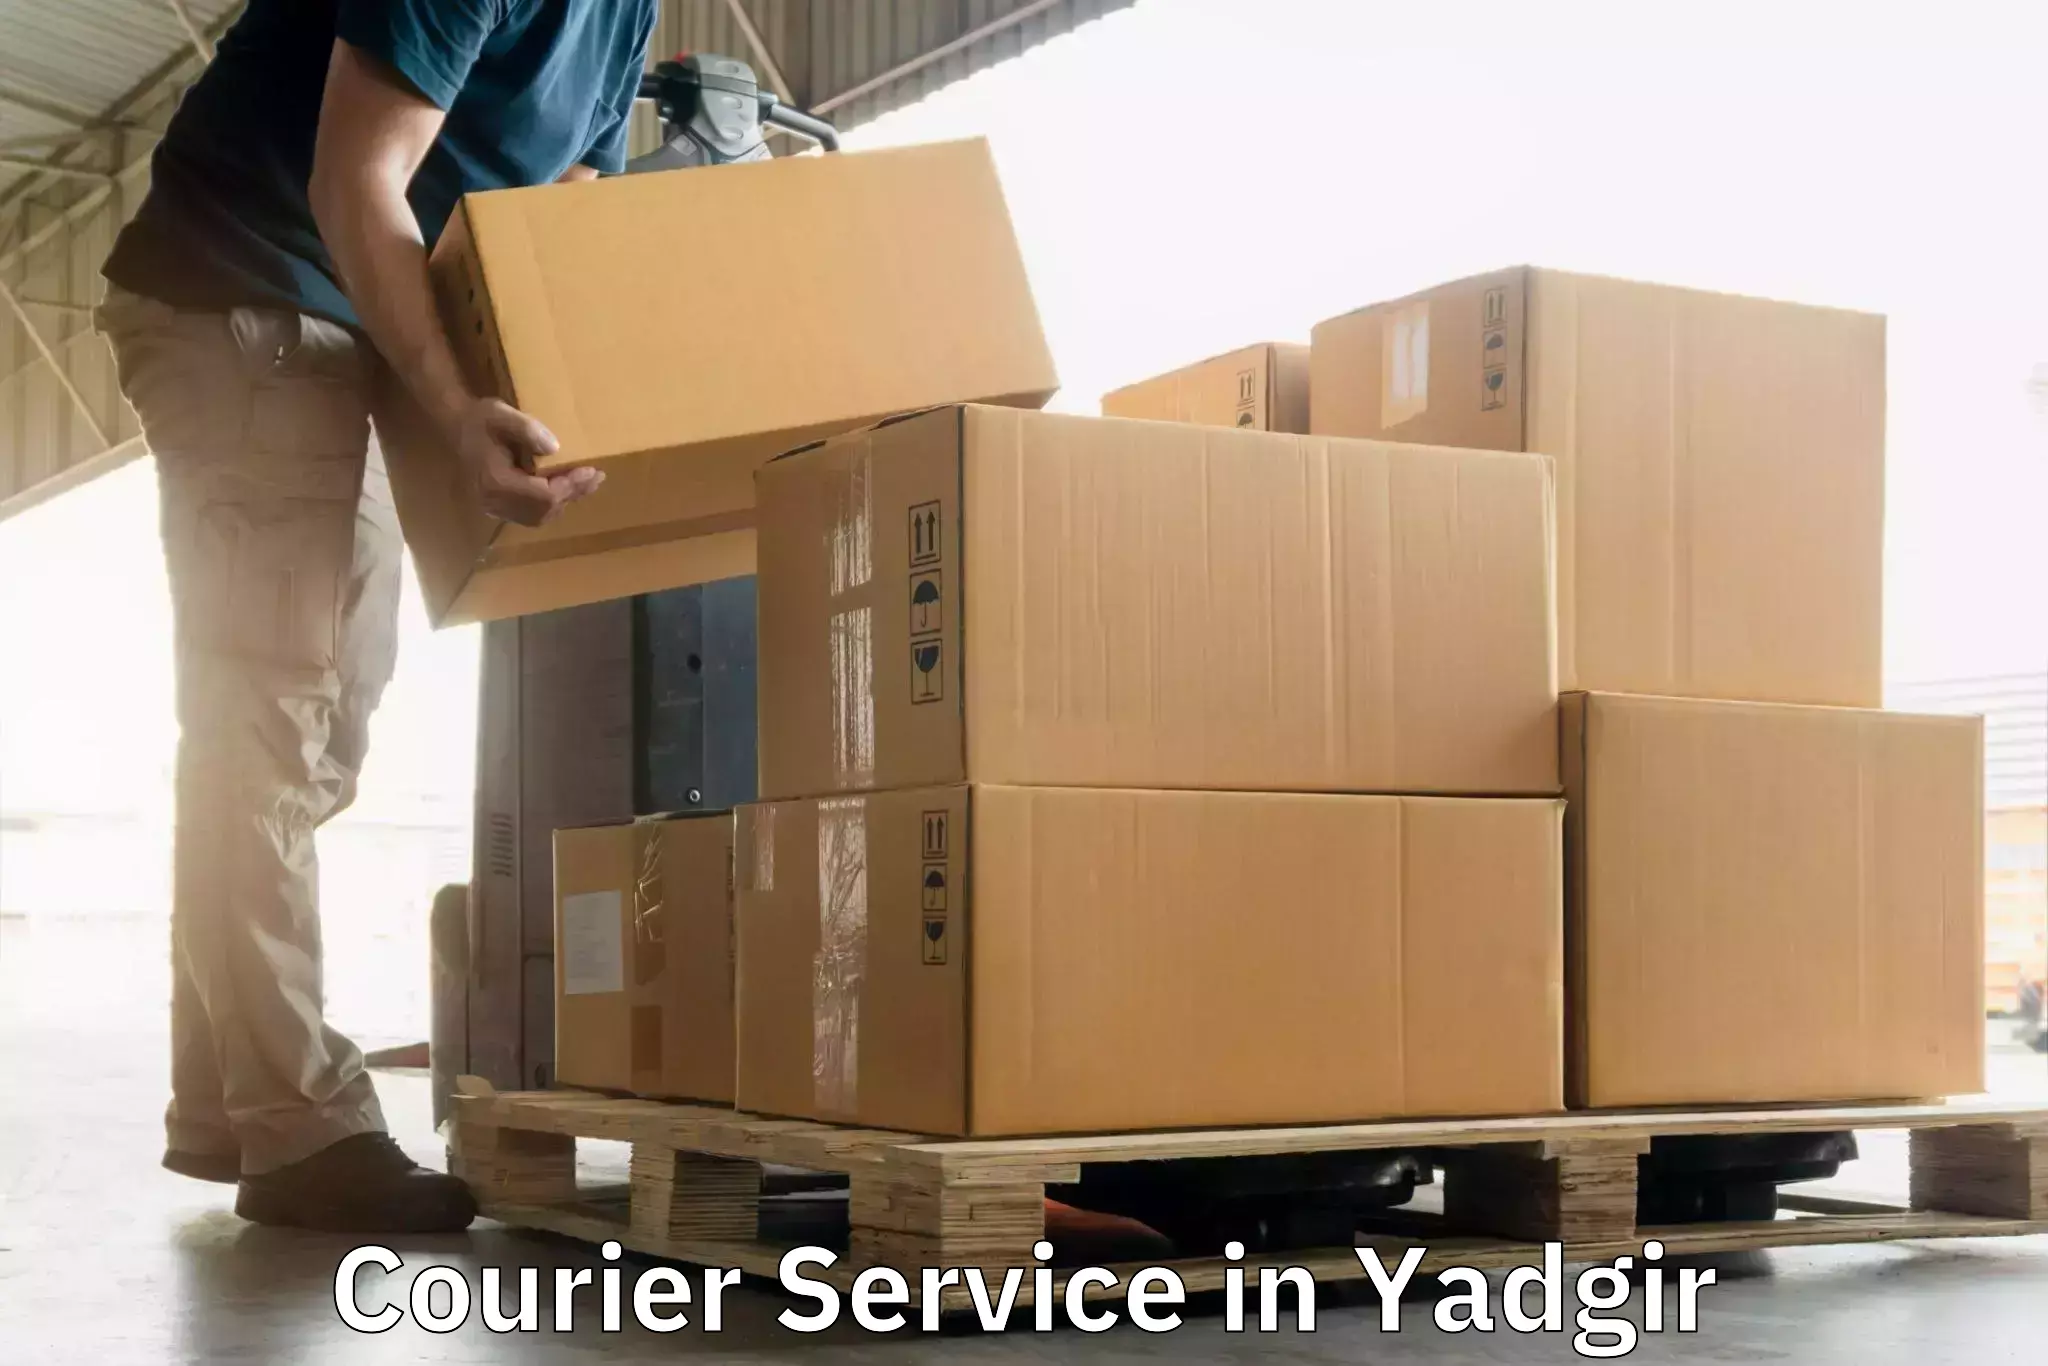 Fast-track shipping solutions in Yadgir